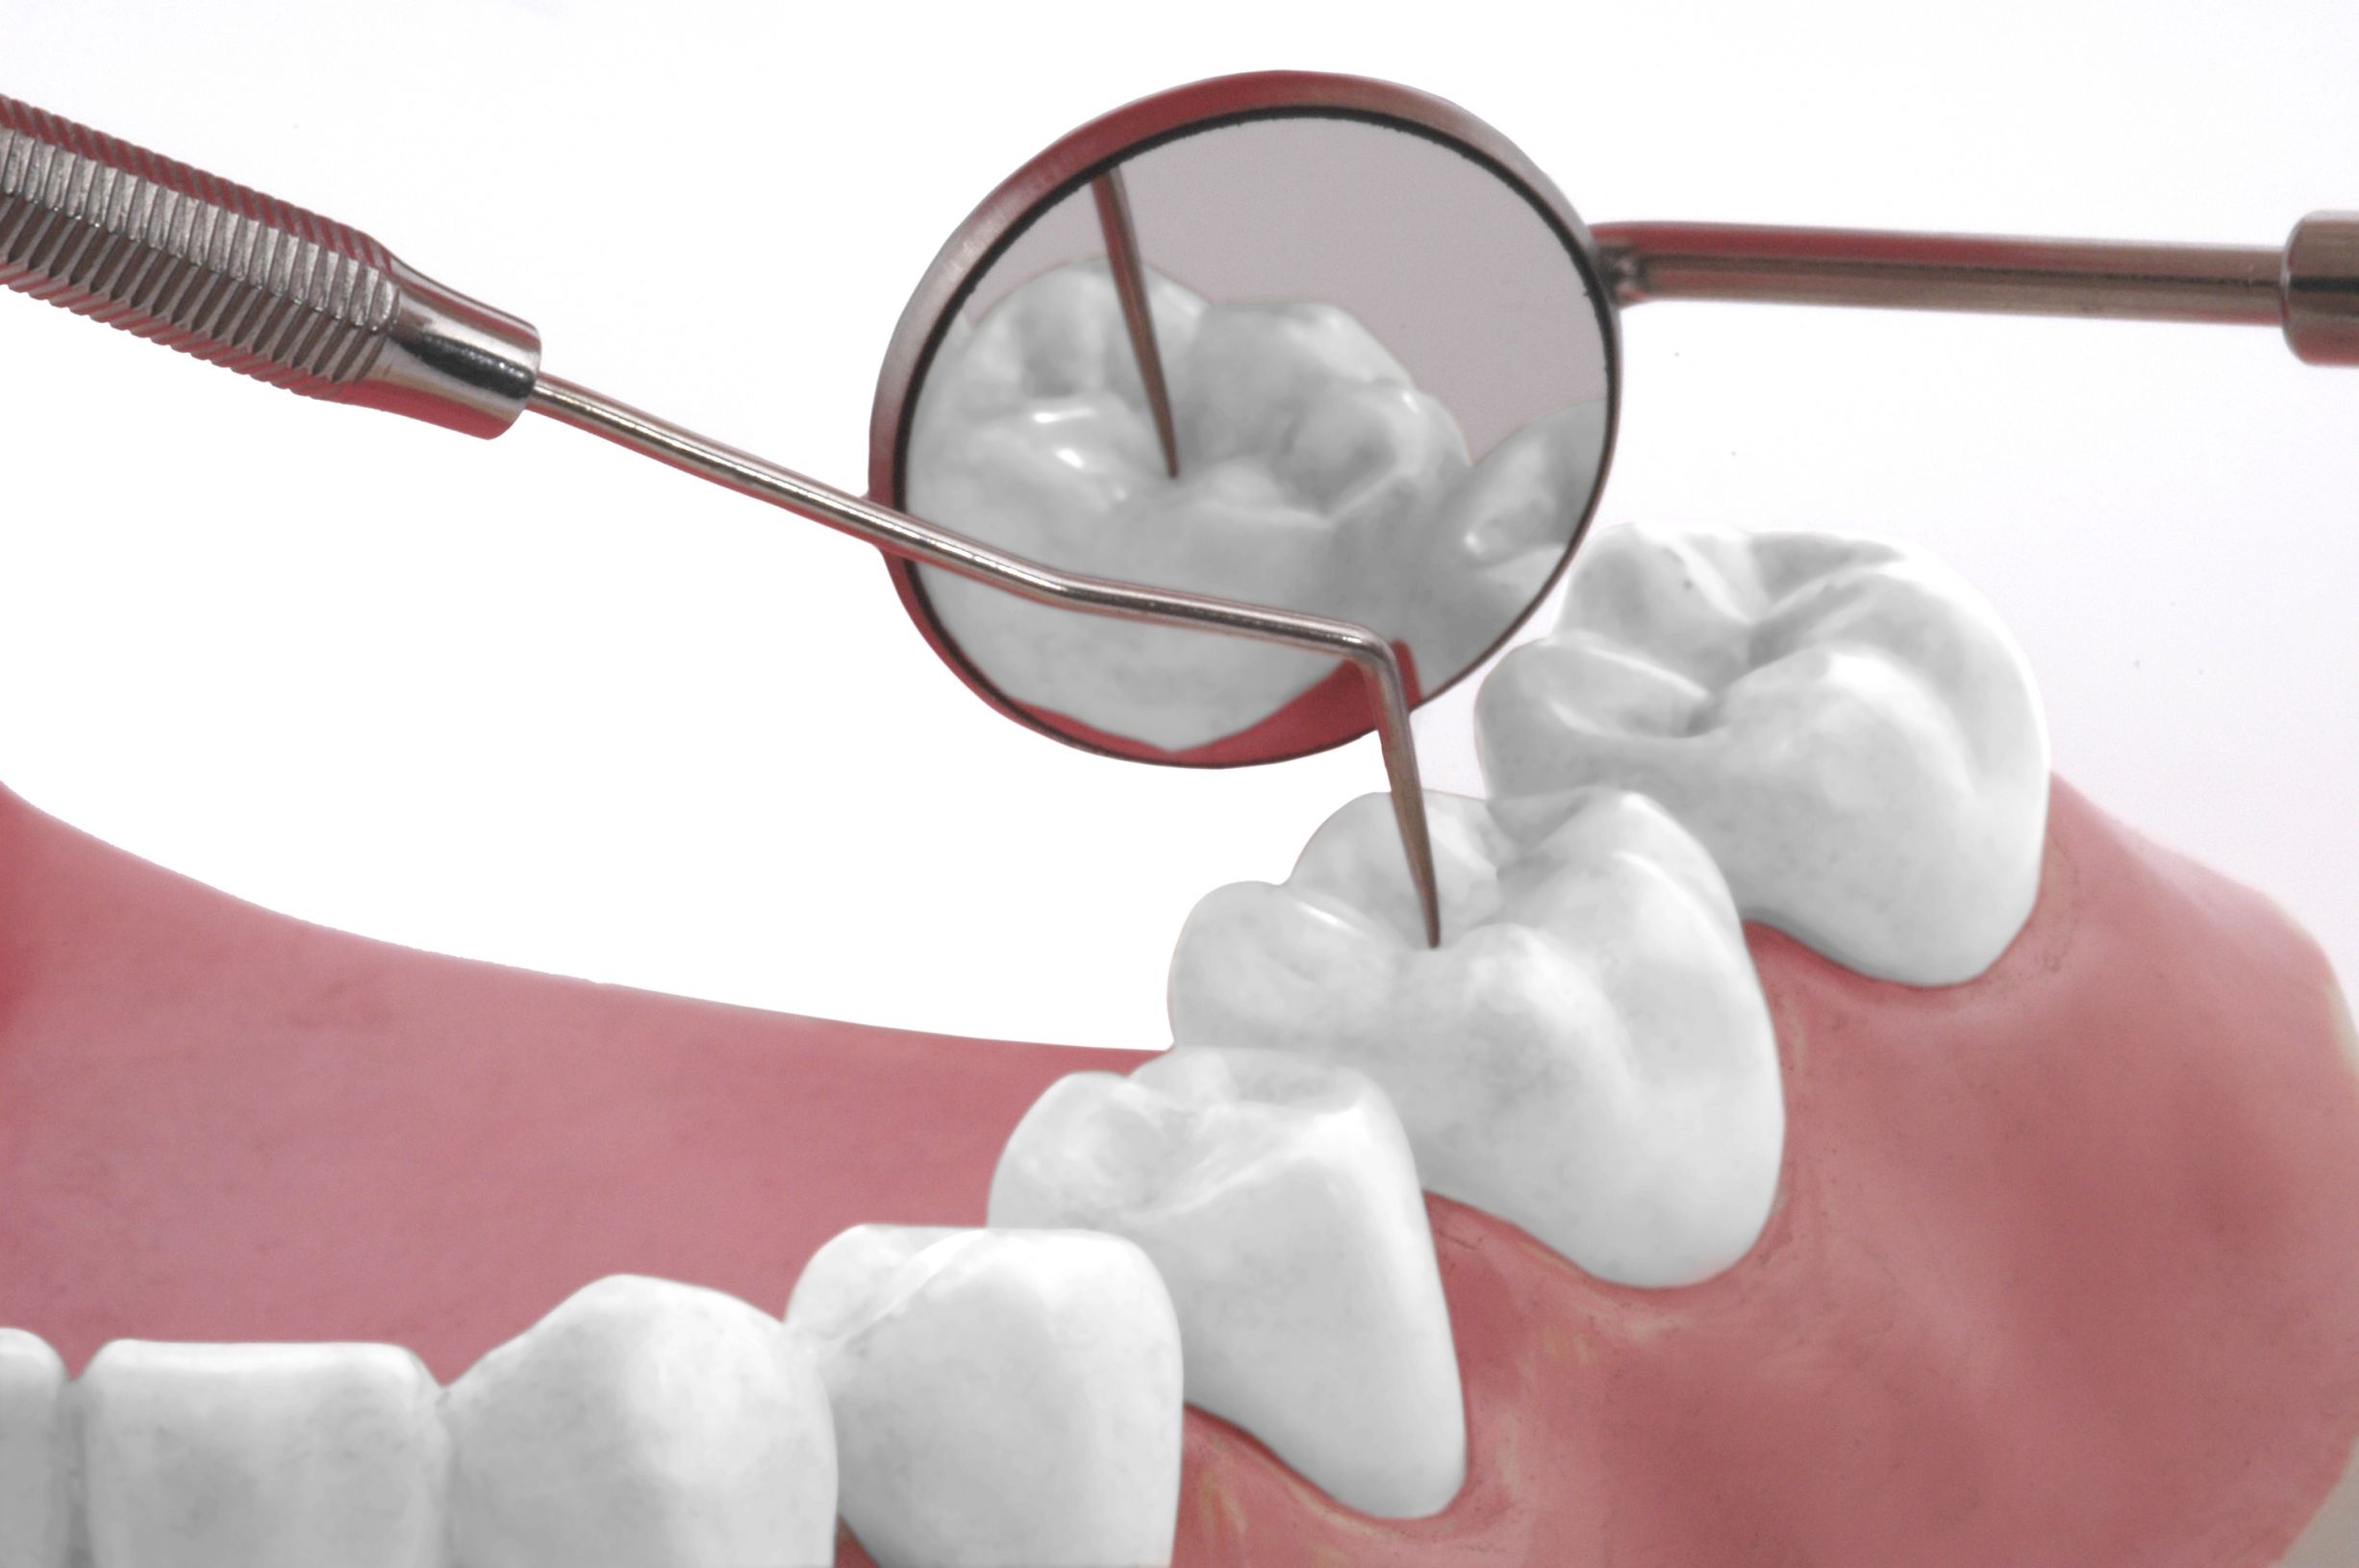 Information You Need to Know before Arranging Periodontal Disease Treatment in Marion, IA